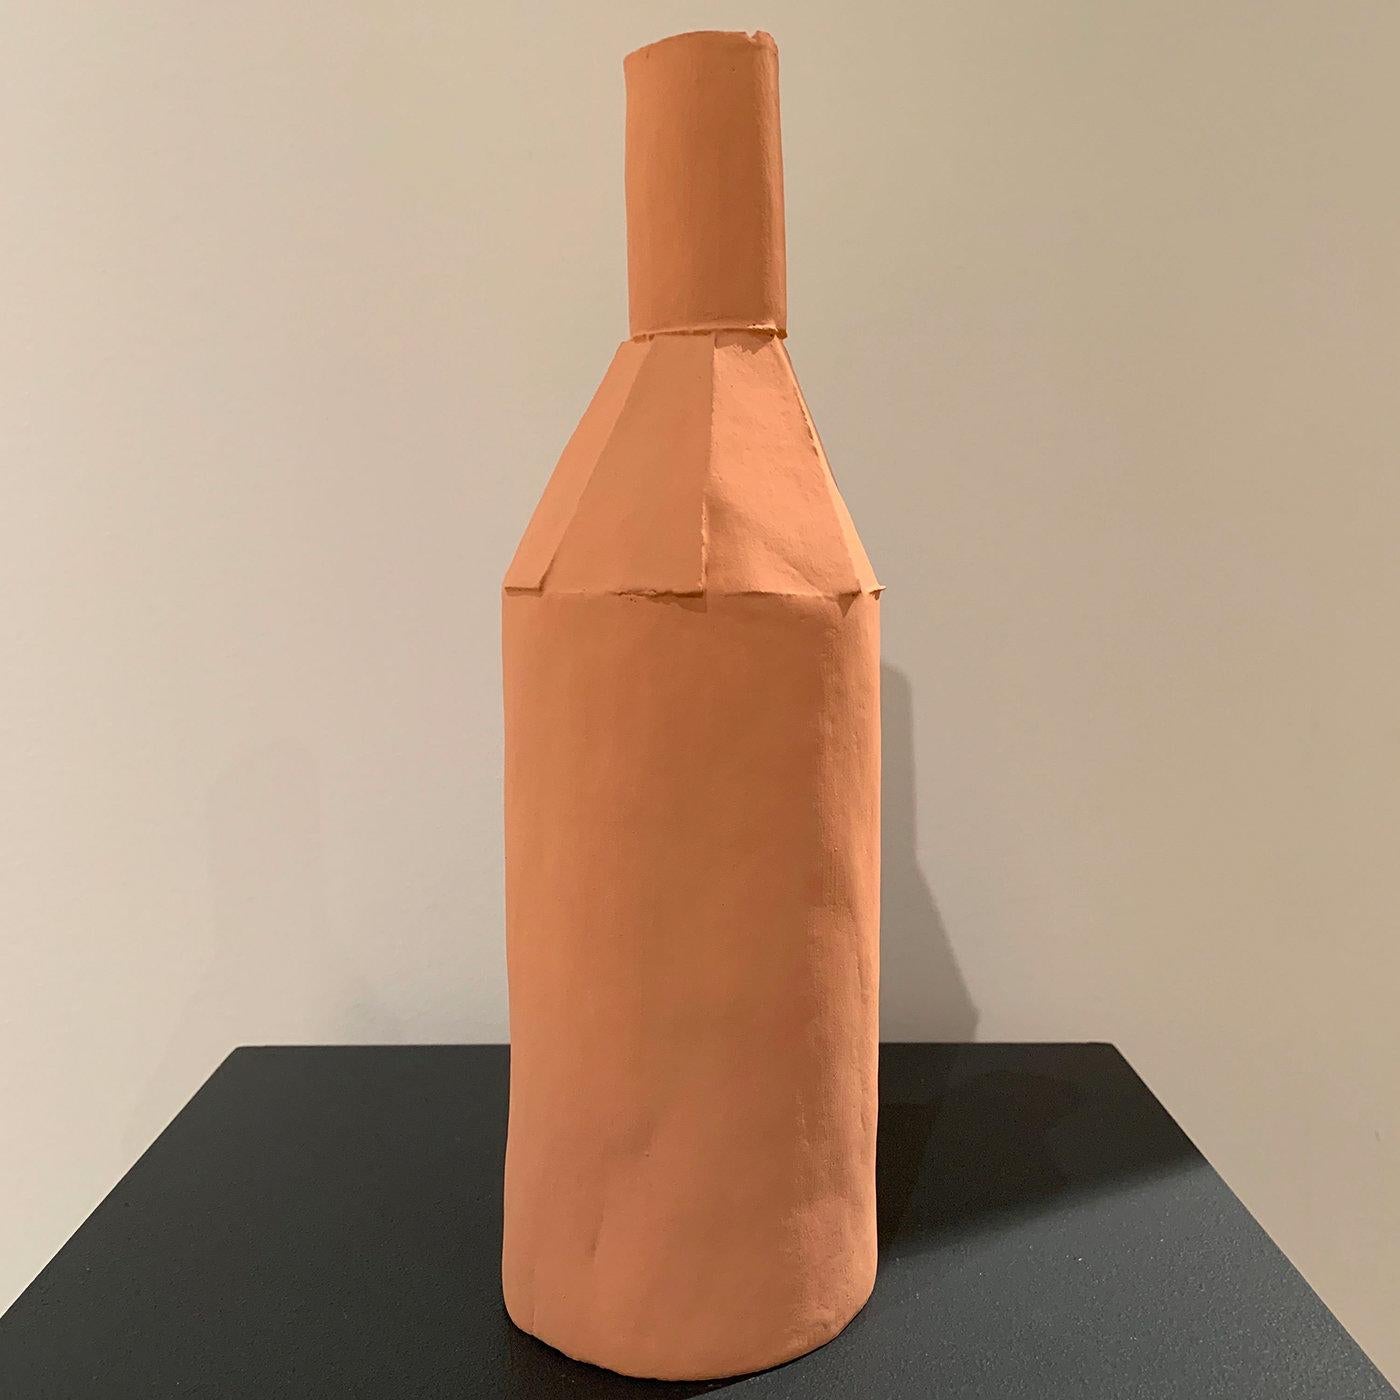 Elegantly shaped like a bottle with irregular silhouette and a paper-like surface, this superb bottle has a delicate pink hue that gives it a dream-like allure. This piece is crafted by hand using a complex method, creating each time a unique work